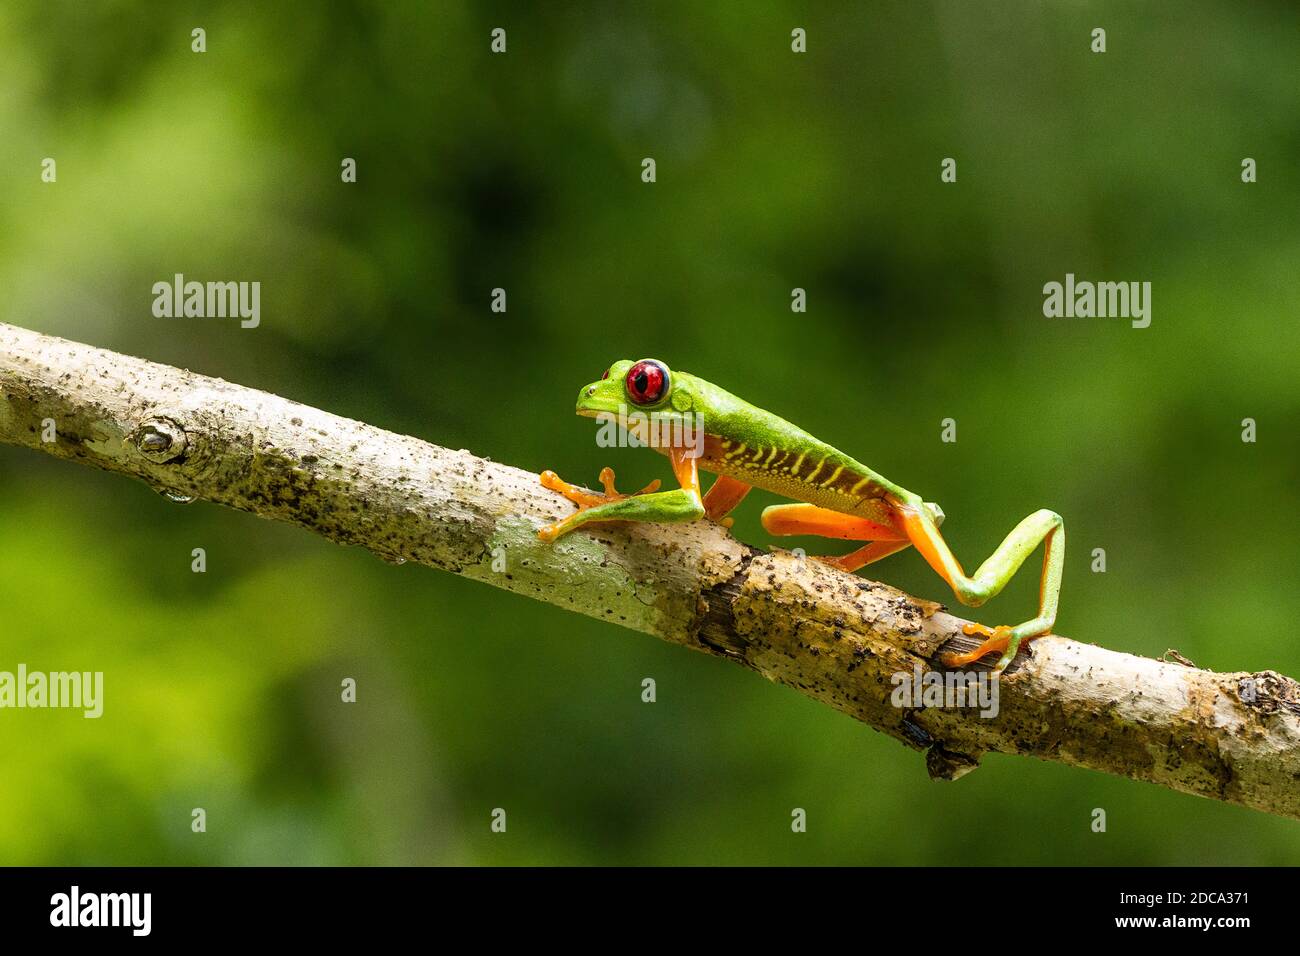 A Red-eyed Tree Frog or Red-eyed Leaf Frog, Agalychnis callidryas, crawling on a branch in the tropical rainforest of Costa Rica. Stock Photo